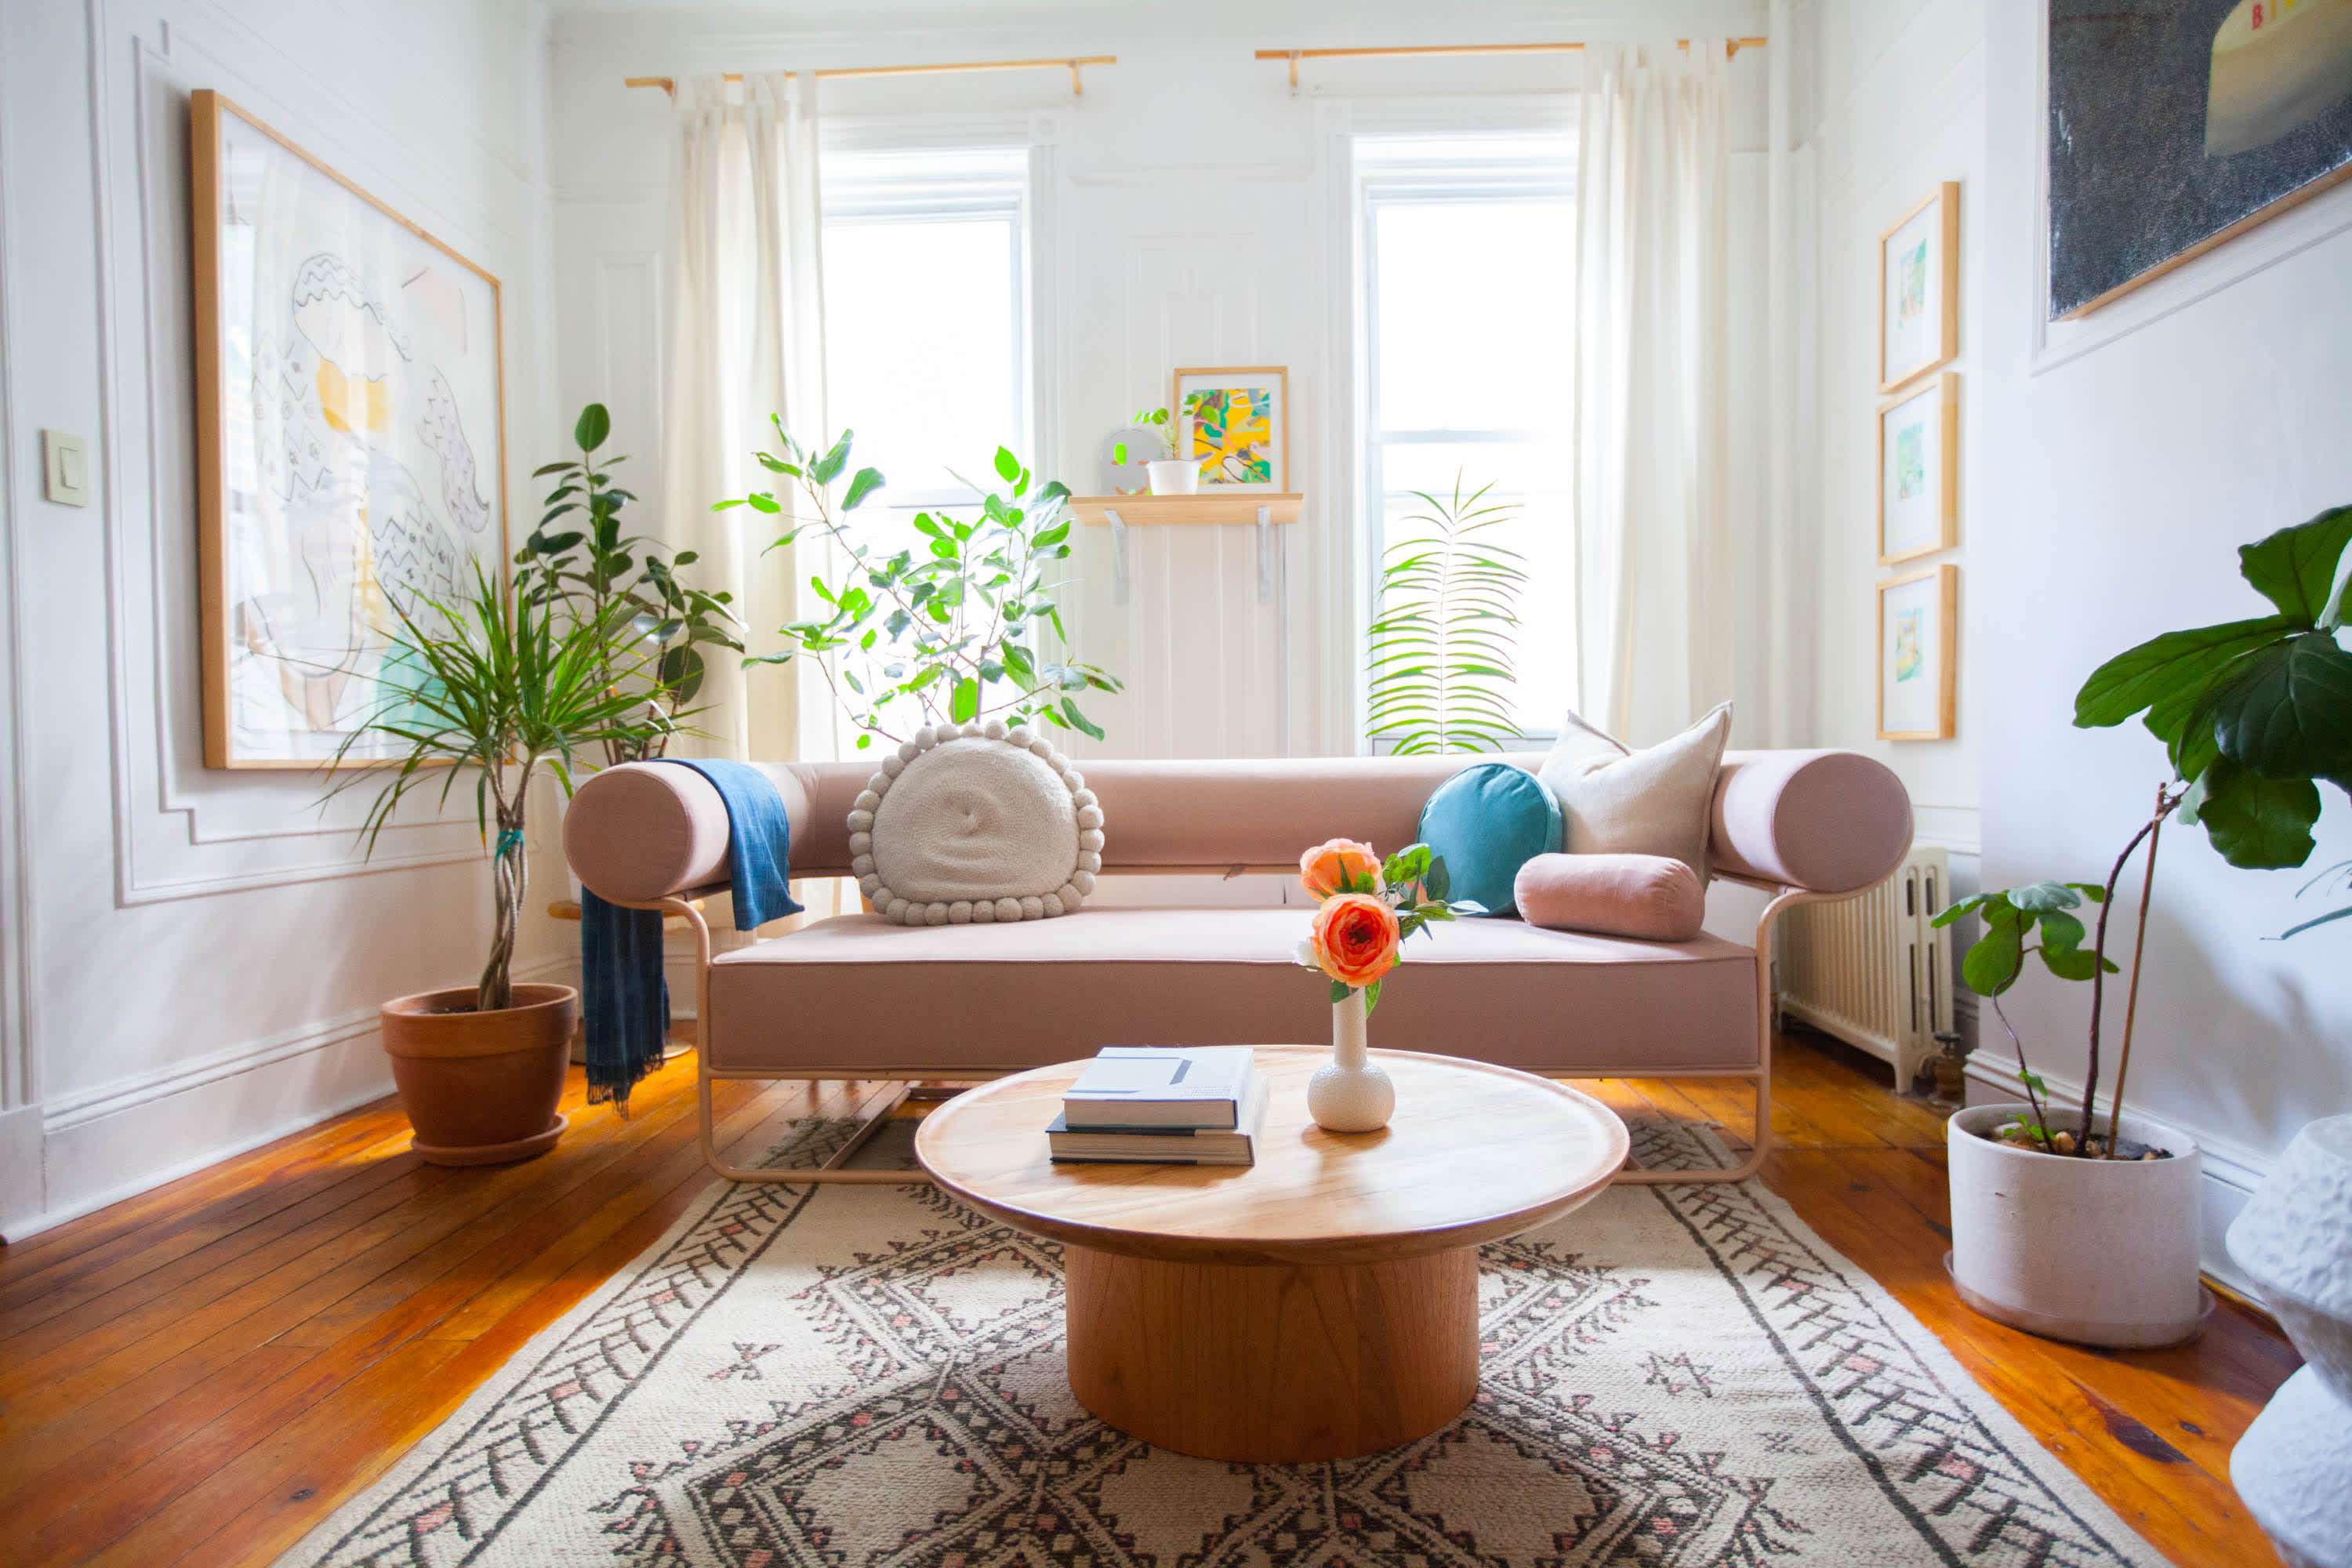 The first apartment essentials you need for a healthy space